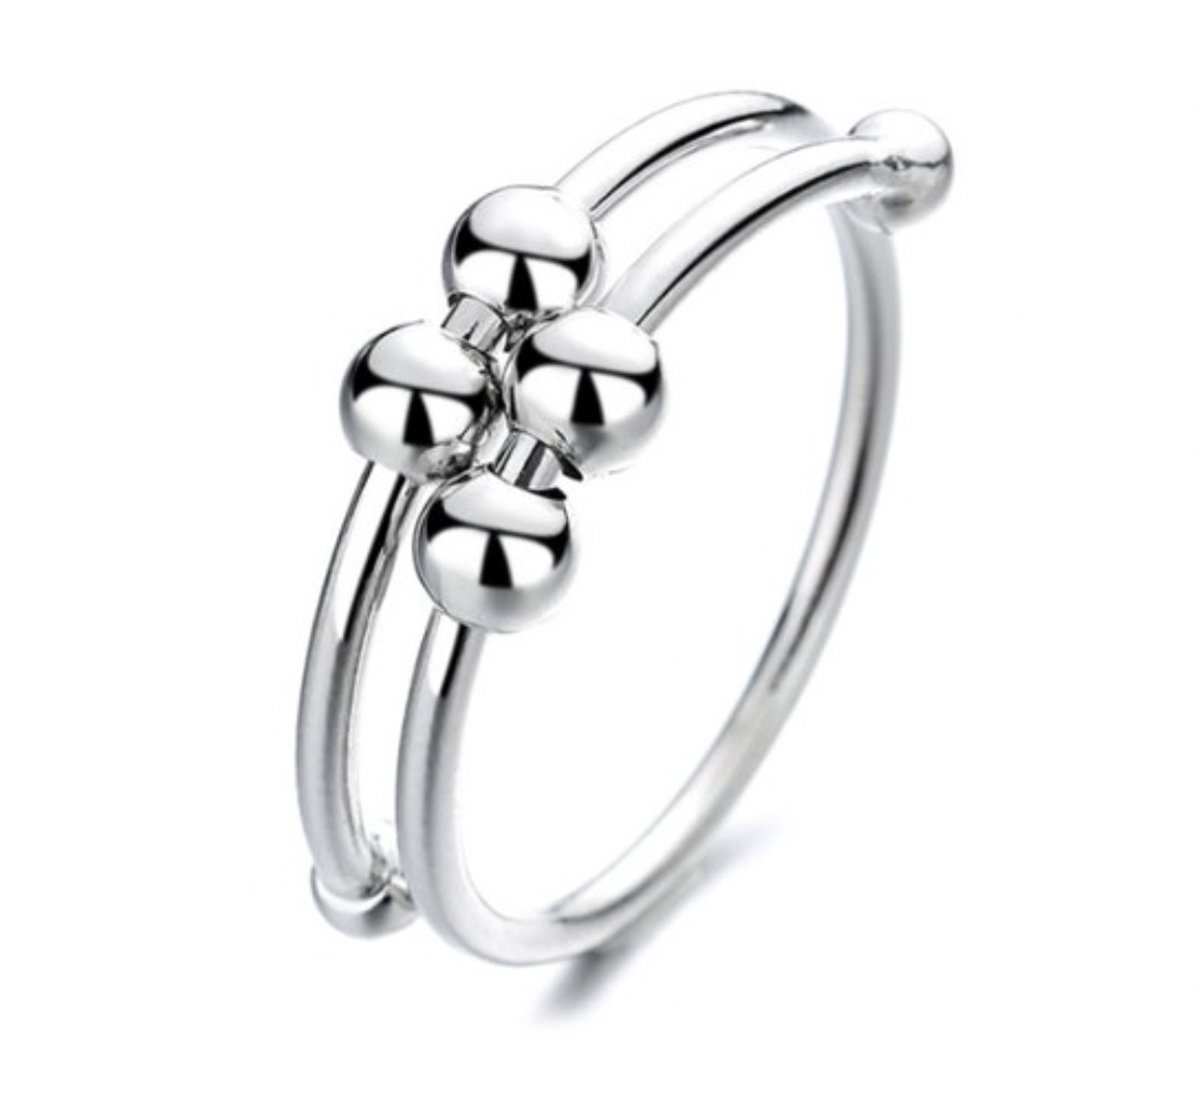 Anxiety Ring - (Dubbele ring) - Stress Ring - Fidget Ring - Anxiety Ring For Finger - Silver Draaibare Ring Dames - Spinning Ring - Spinner Ring - One Size